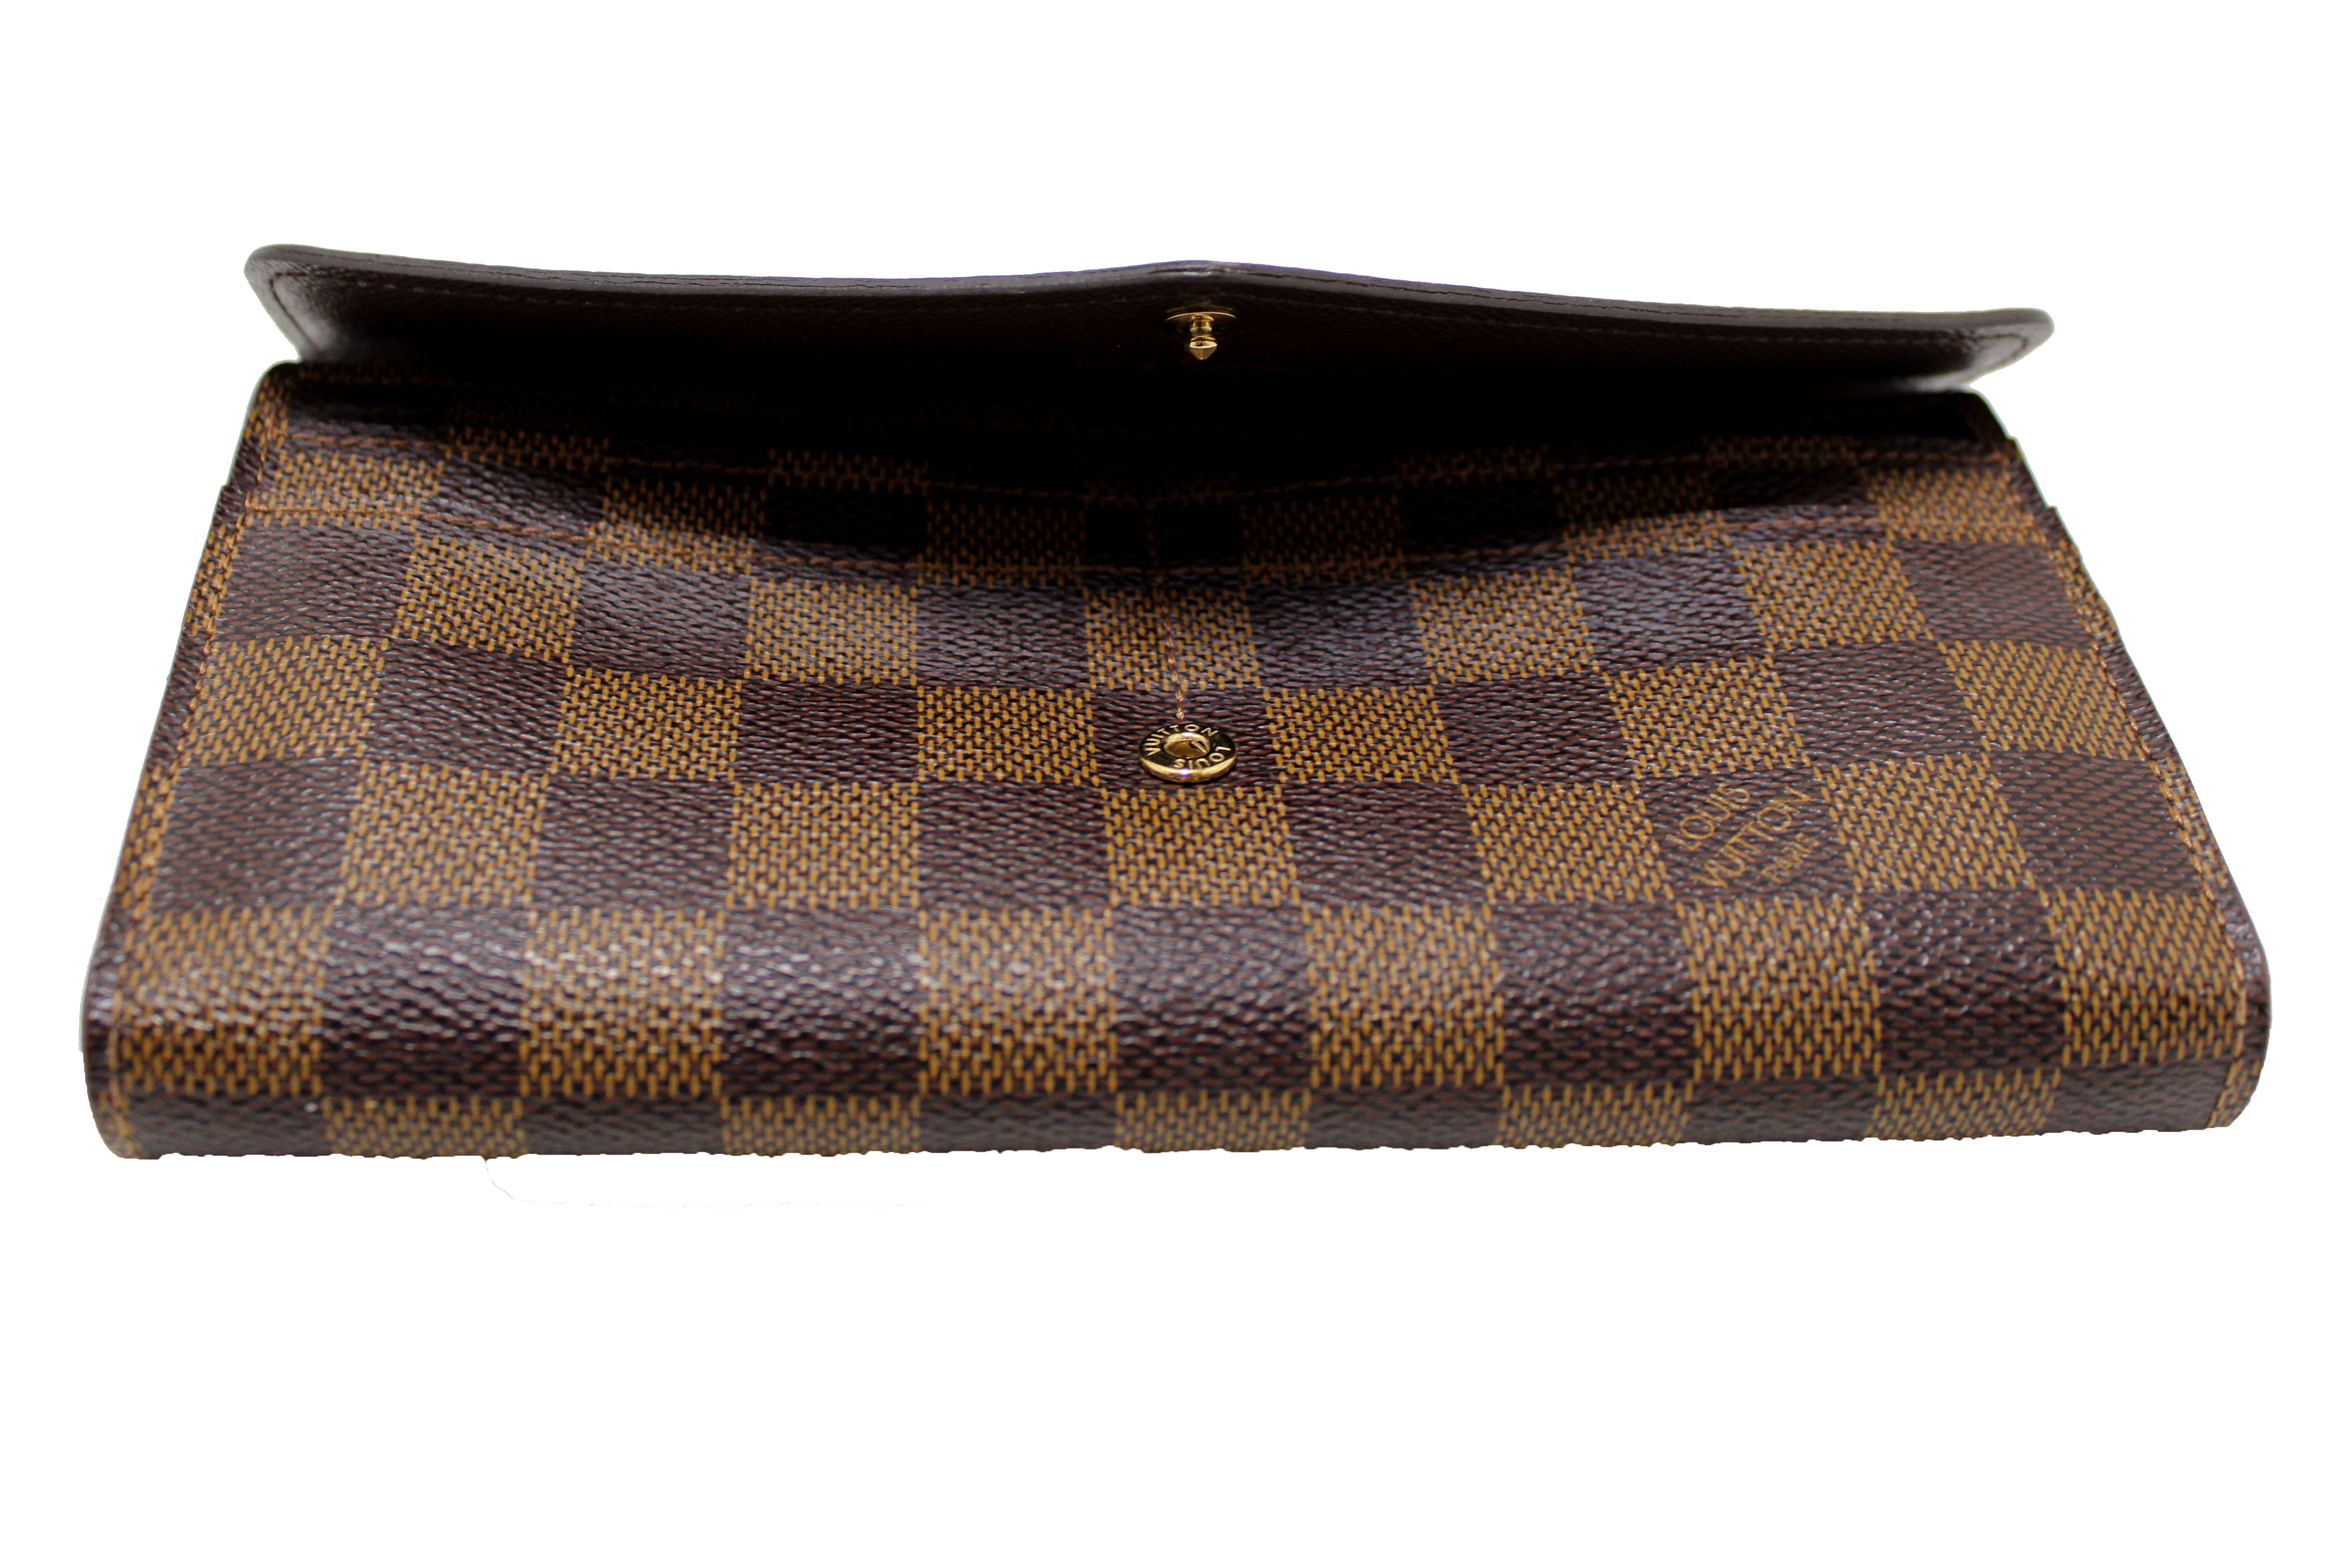 Sarah Wallet Damier Ebene Canvas - Wallets and Small Leather Goods